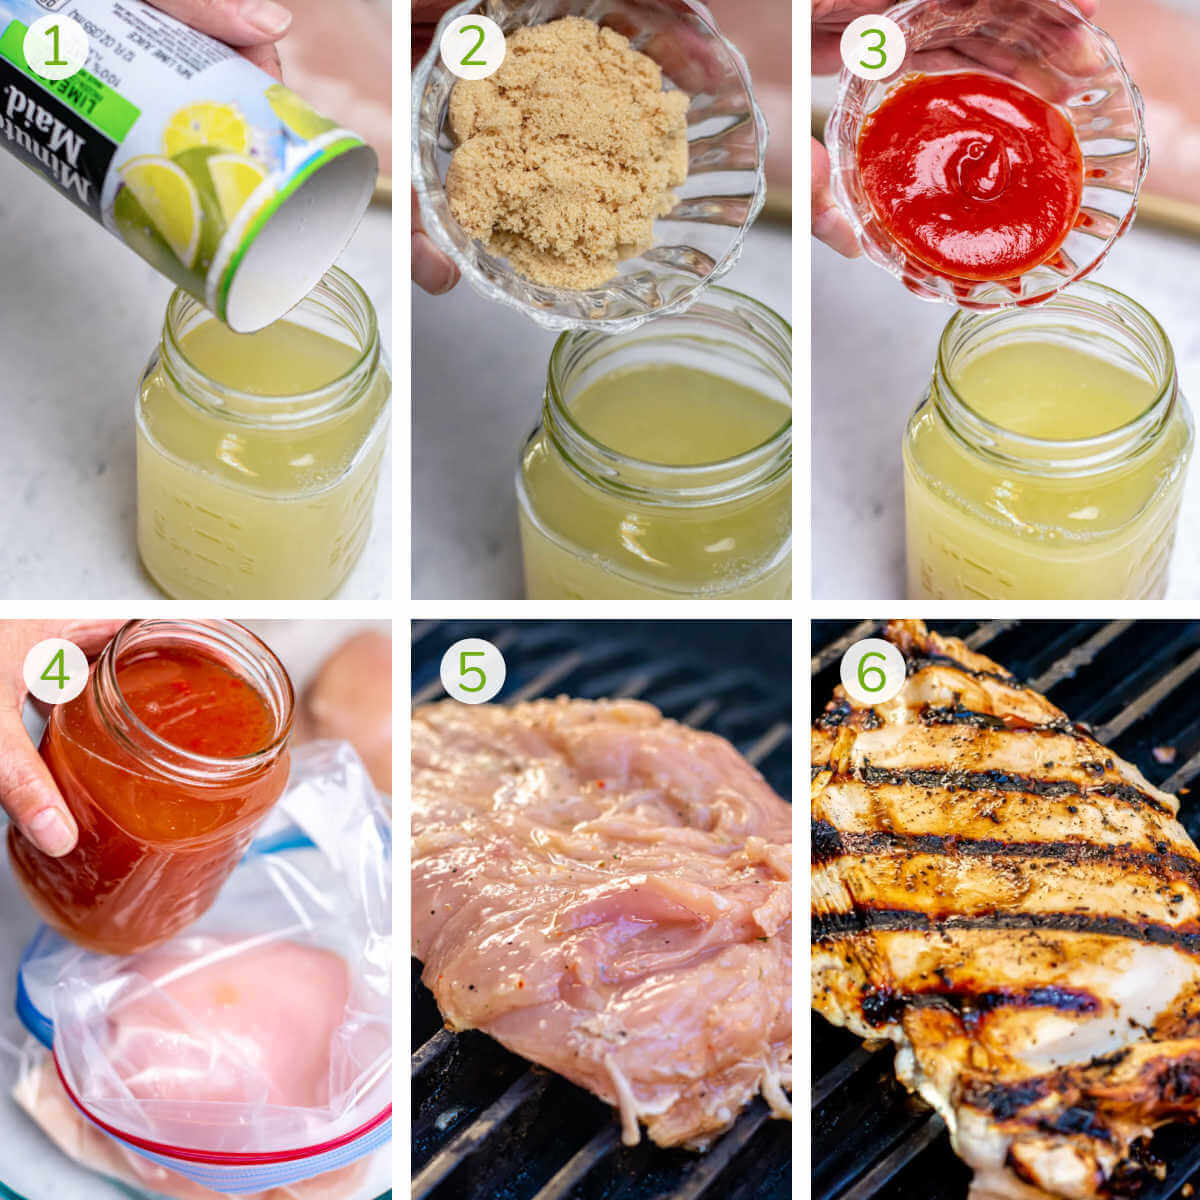 instruction photos showing adding the limeade, brown sugar, ketchup and marinating and grilling.